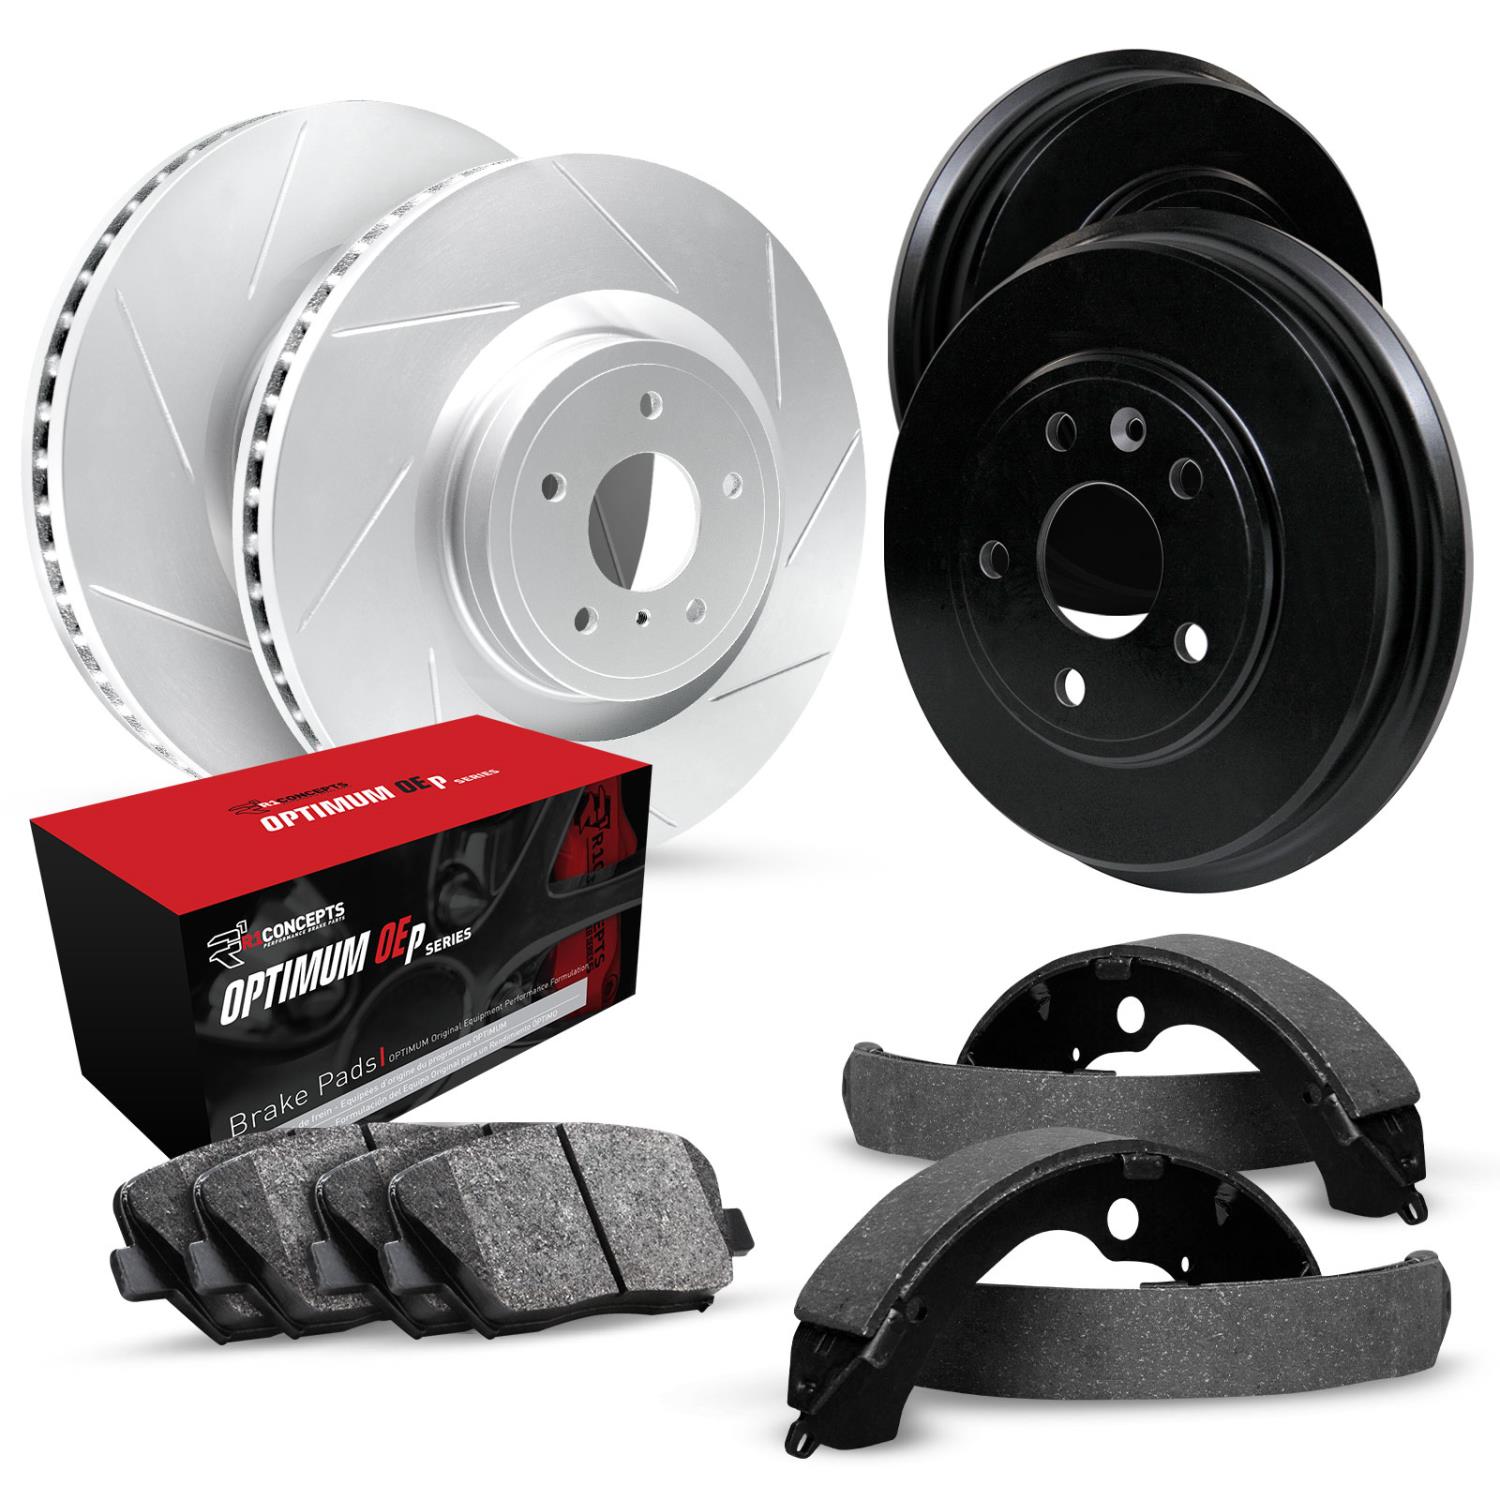 GEO-Carbon Slotted Brake Rotor & Drum Set w/Optimum OE Pads & Shoes, 1983-1992 GM, Position: Front & Rear